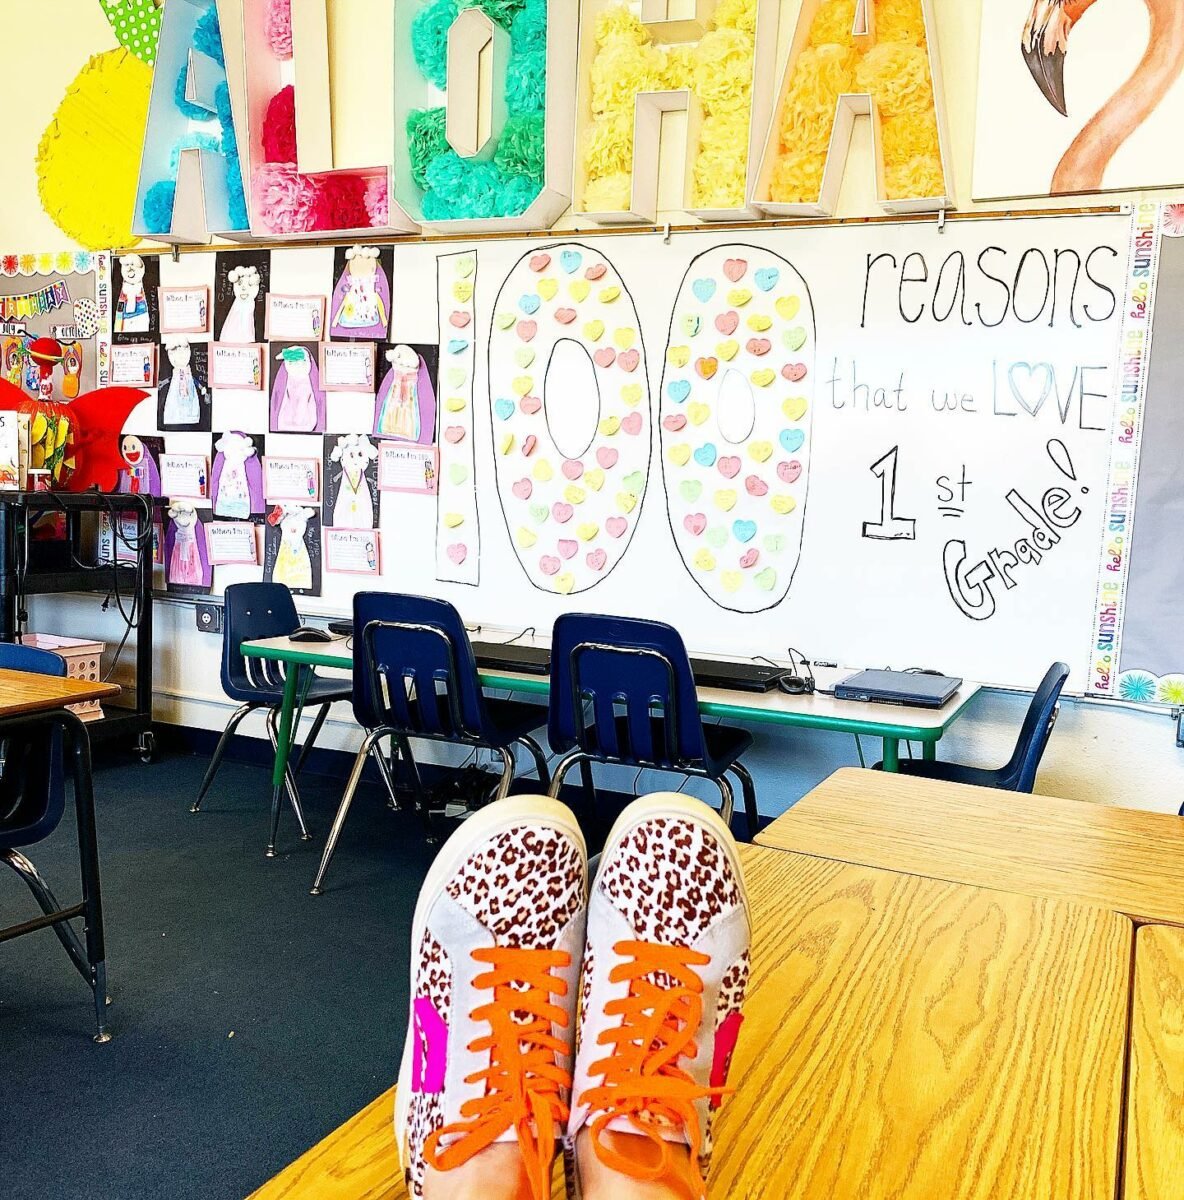 100 reasons that we love first grade on white board